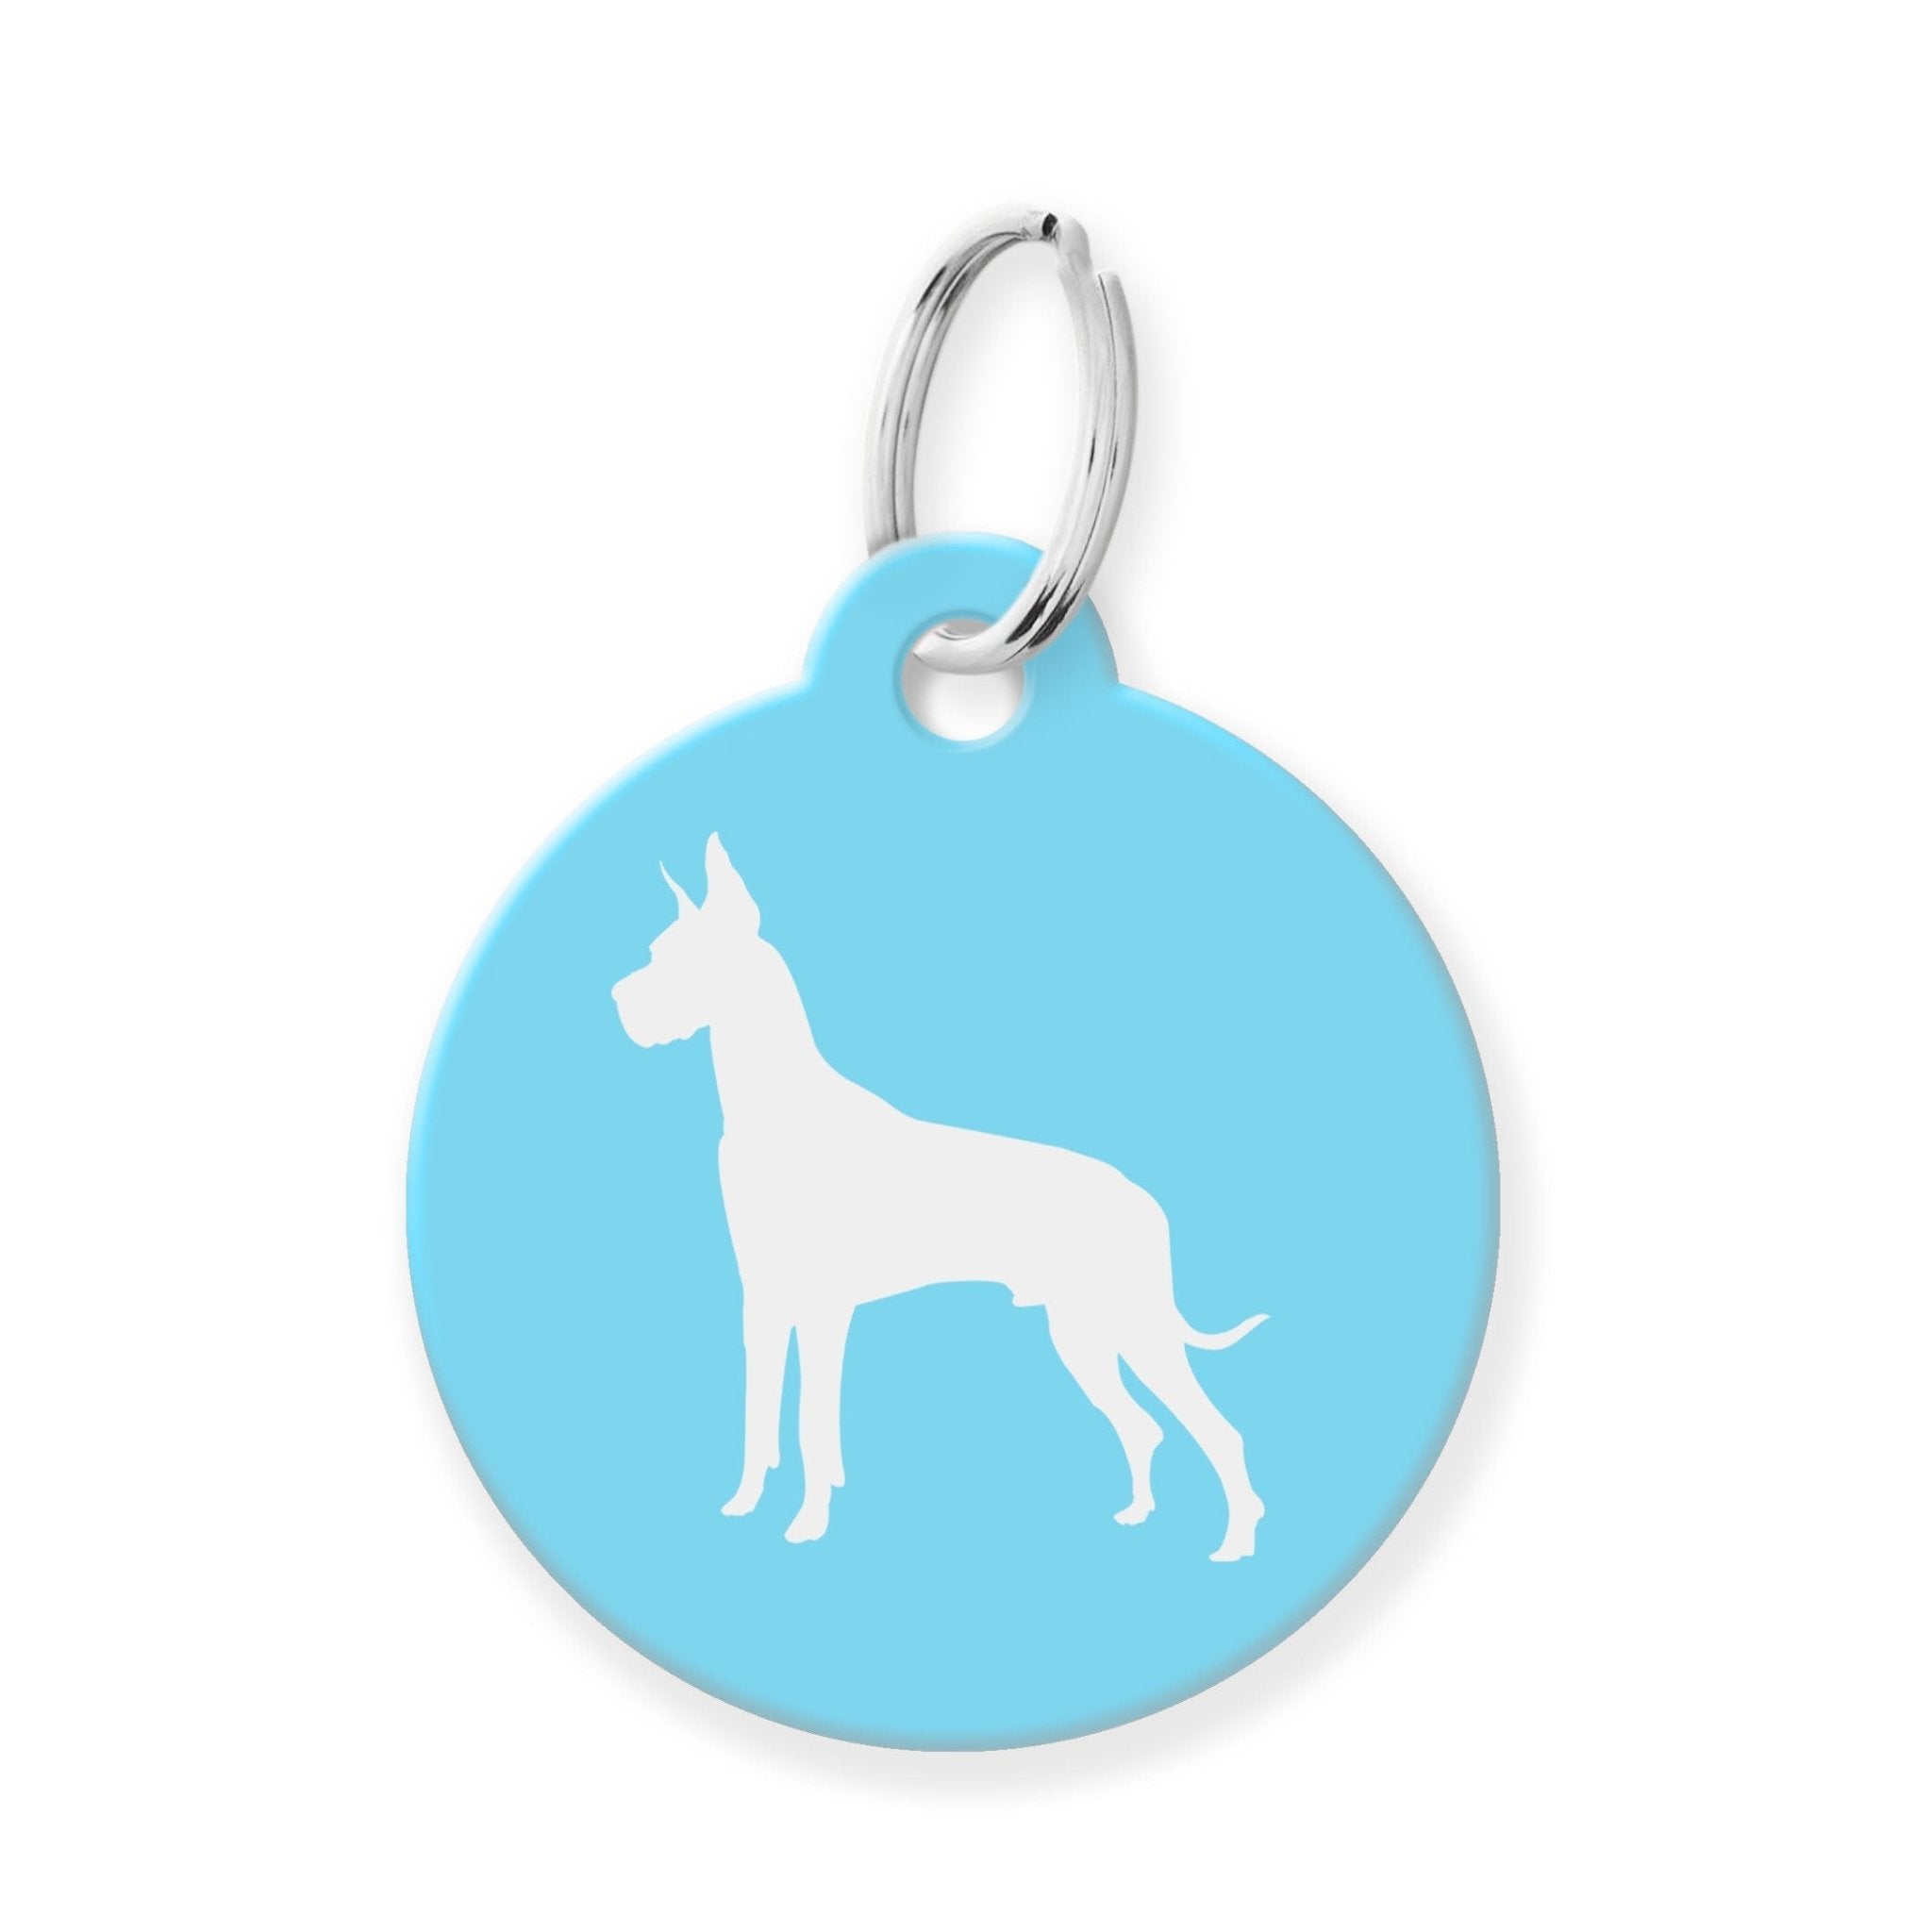 Great Dane Silhouette Pet Tag - The Barking Mutt